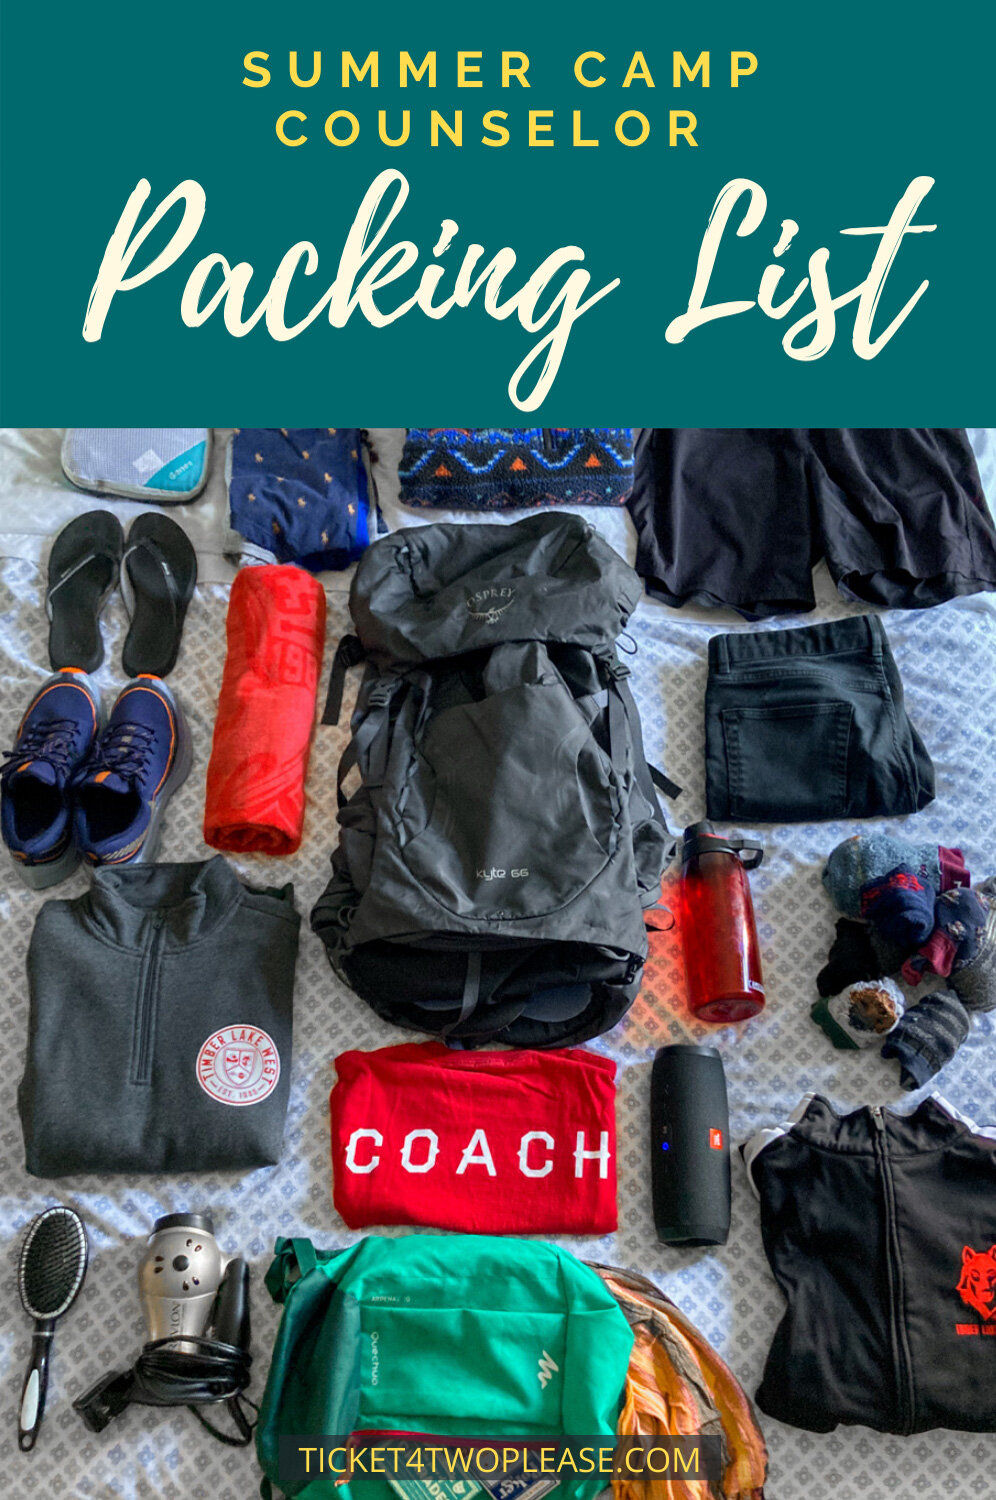 Packing Checklist for Overnight Summer Camp - The Overnight Camp